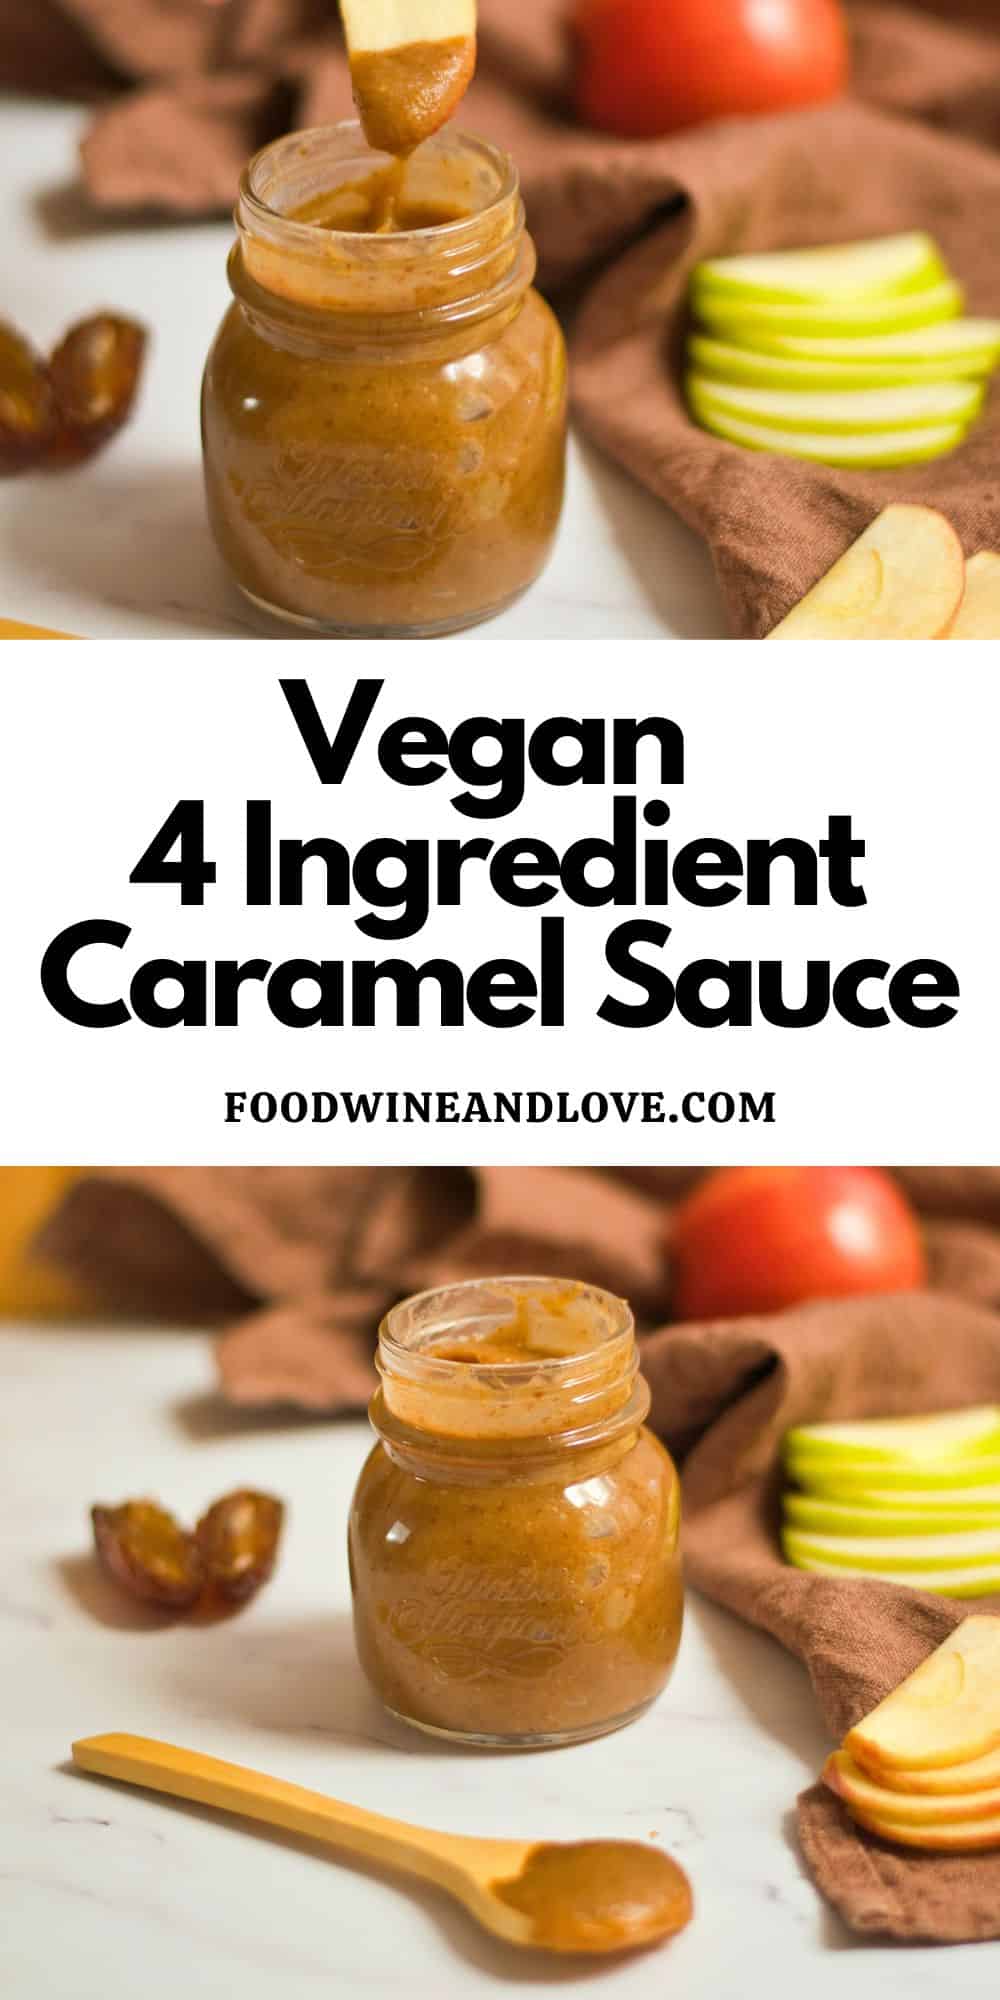 Vegan 4 Ingredient Caramel Sauce, a delicious and simple recipe for making a healthier caramel sauce for desserts and dips.